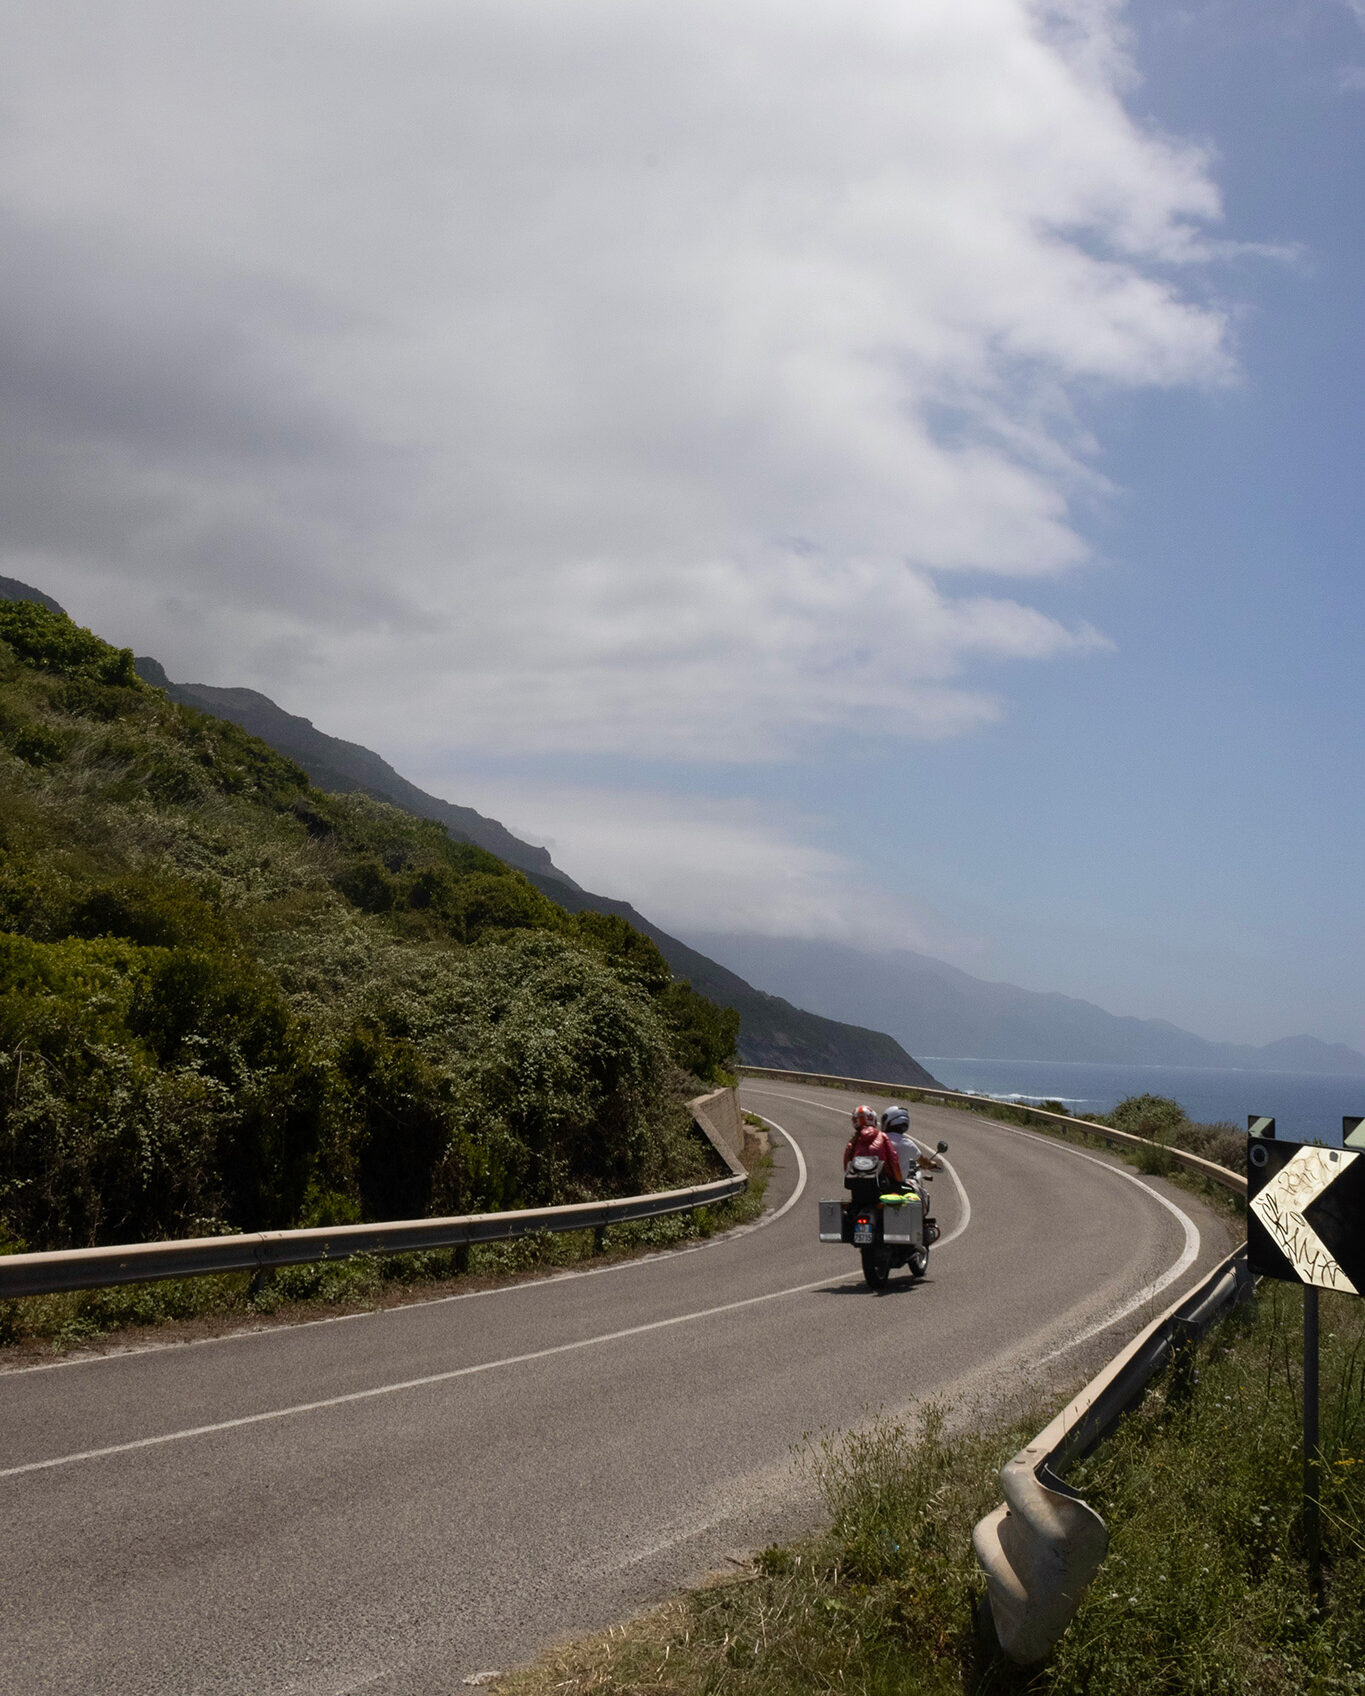 A motorcycle with two passengers drives down a winding road around the edge of a mountain.